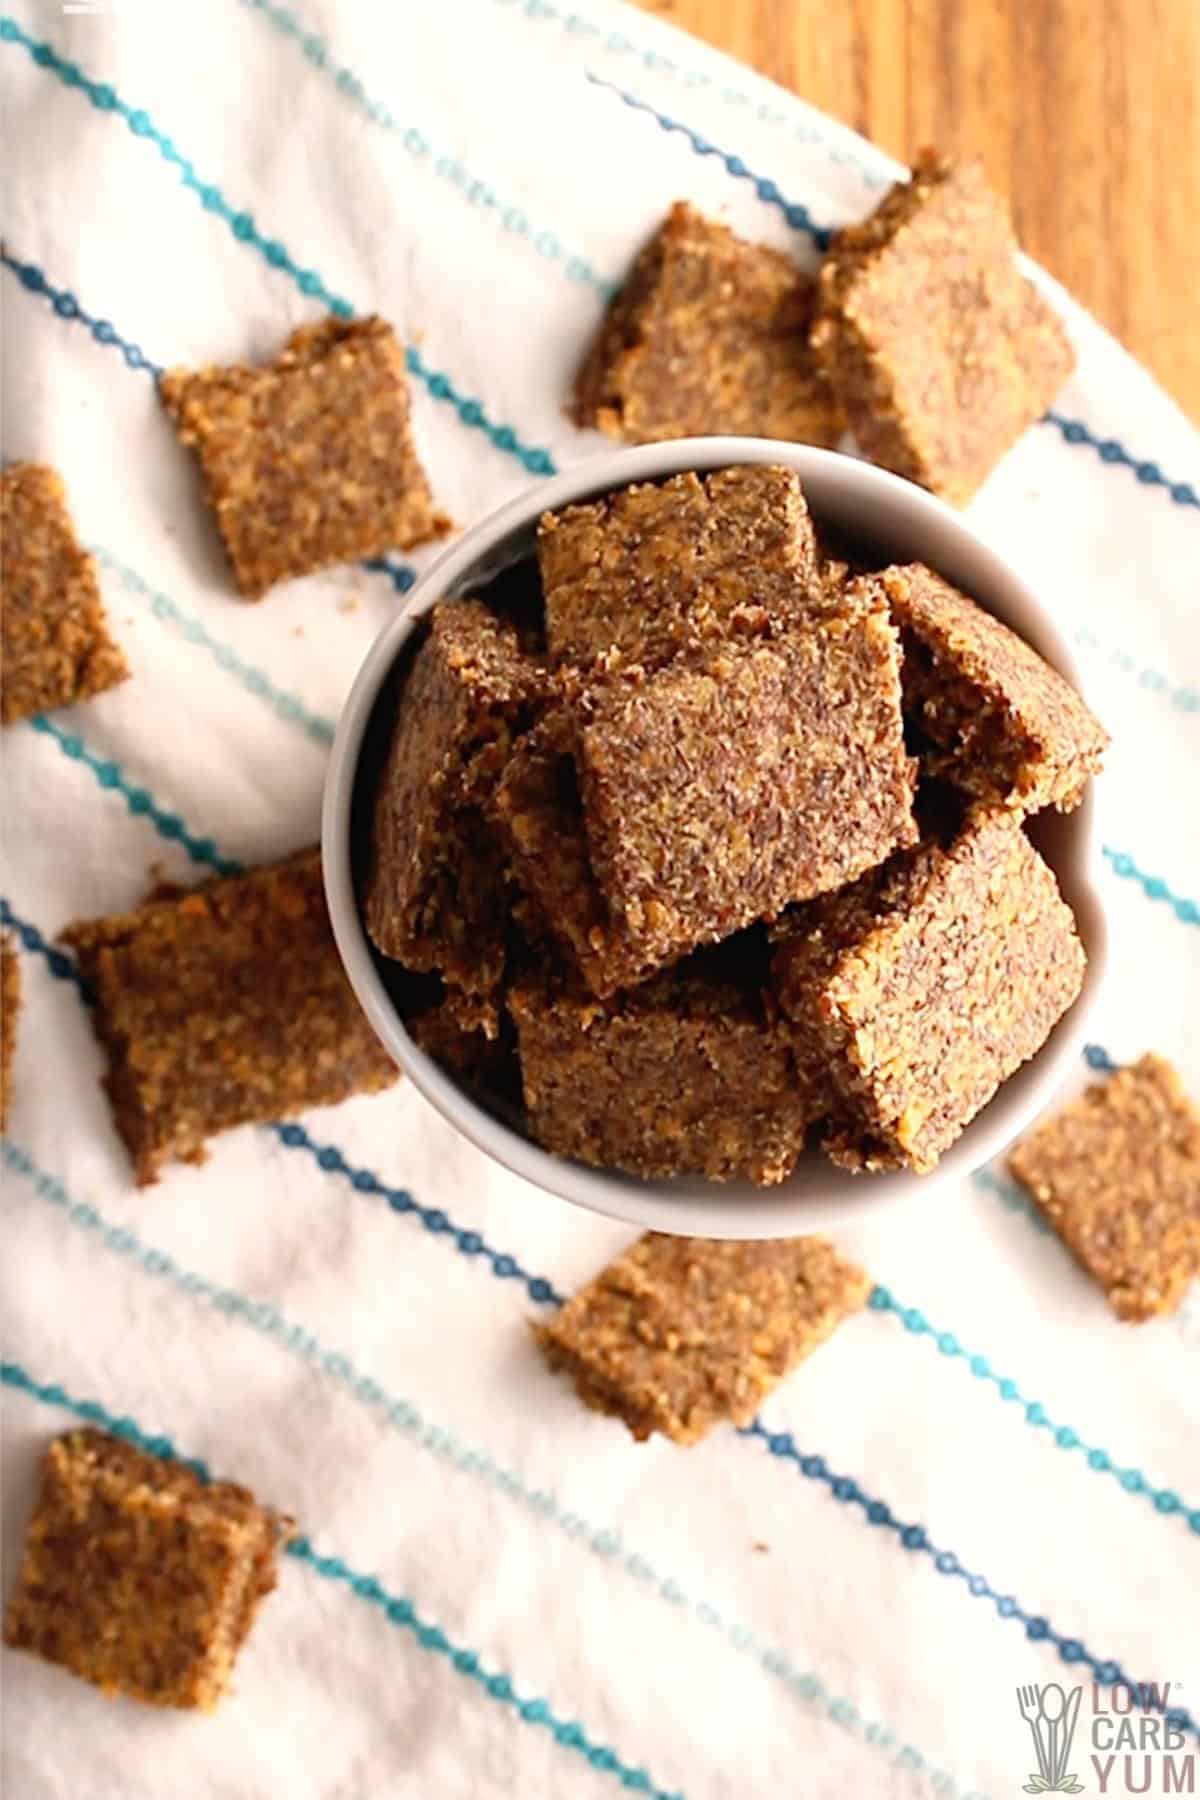 crackers made with flax seeds